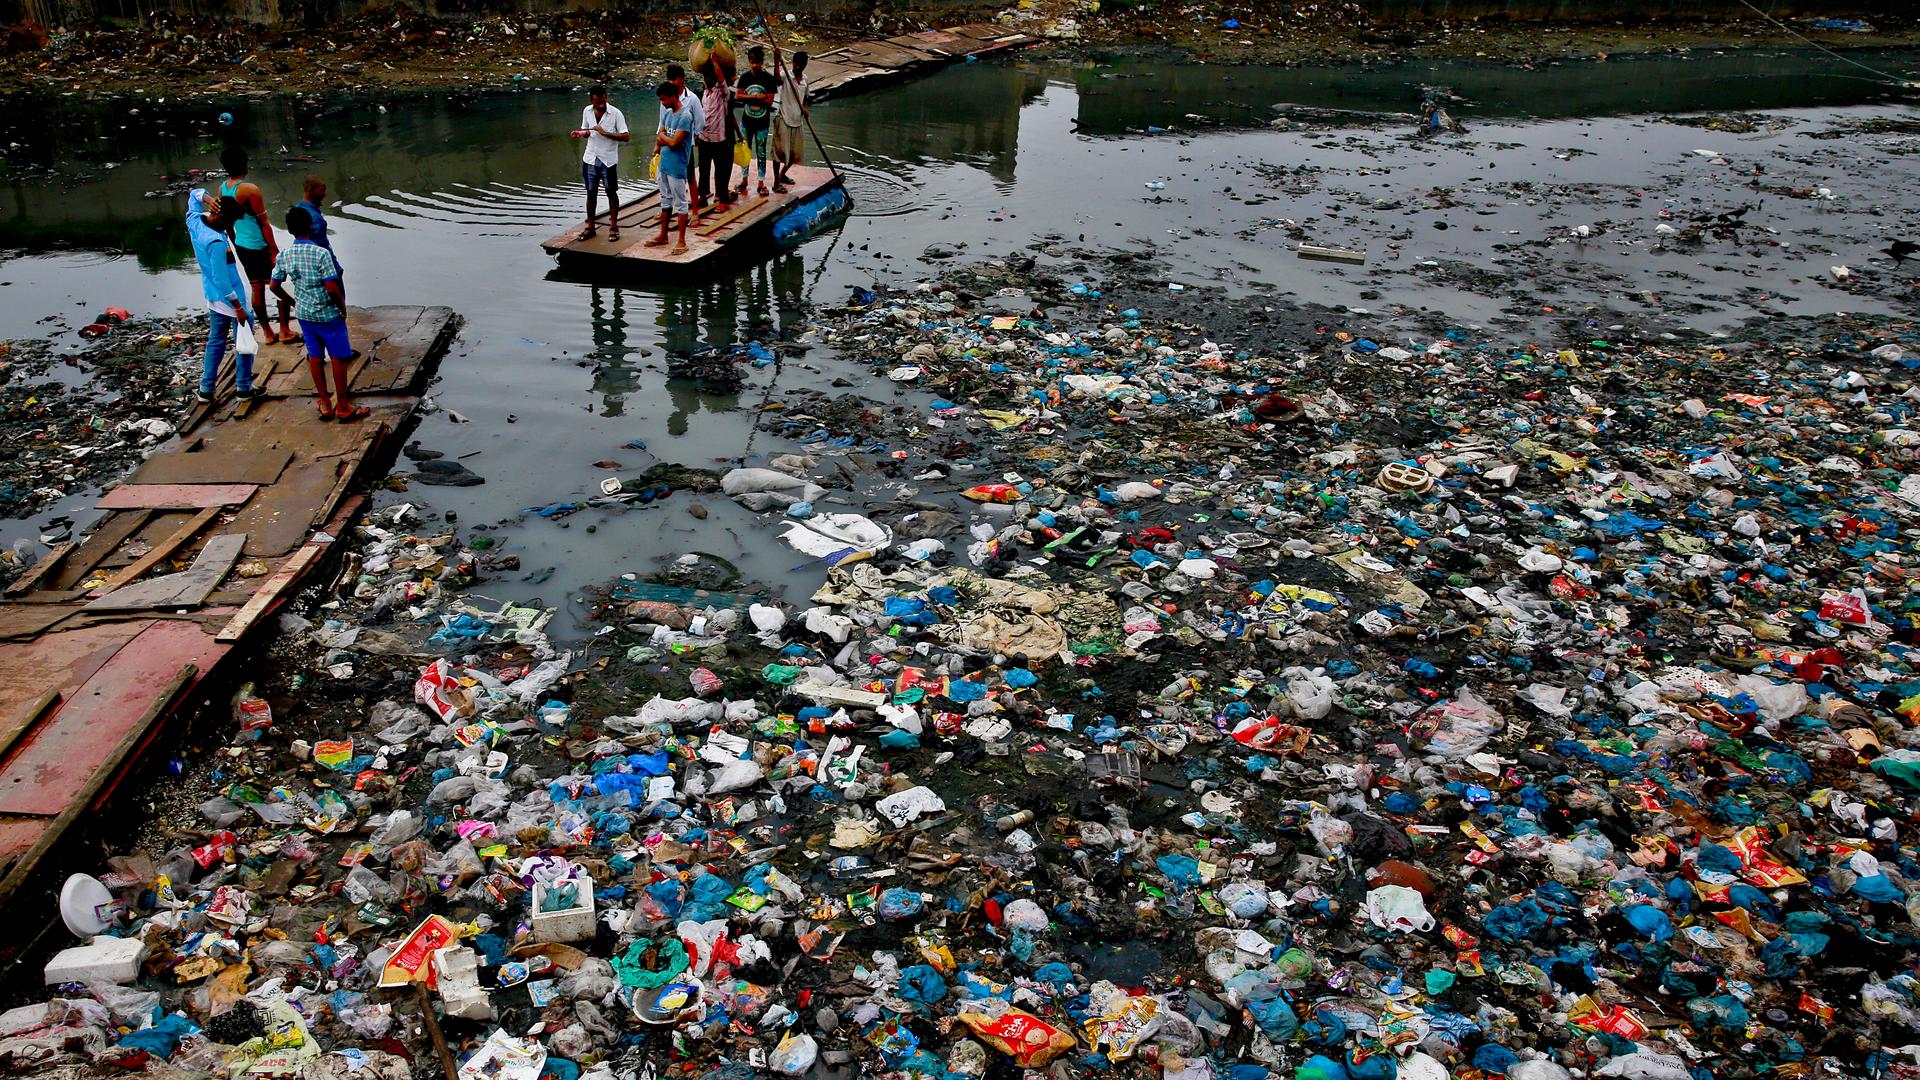 In this Sunday, Oct. 2, 2016 file photo, a man guides a raft through a polluted canal littered with plastic bags and other garbage in Mumbai, India.